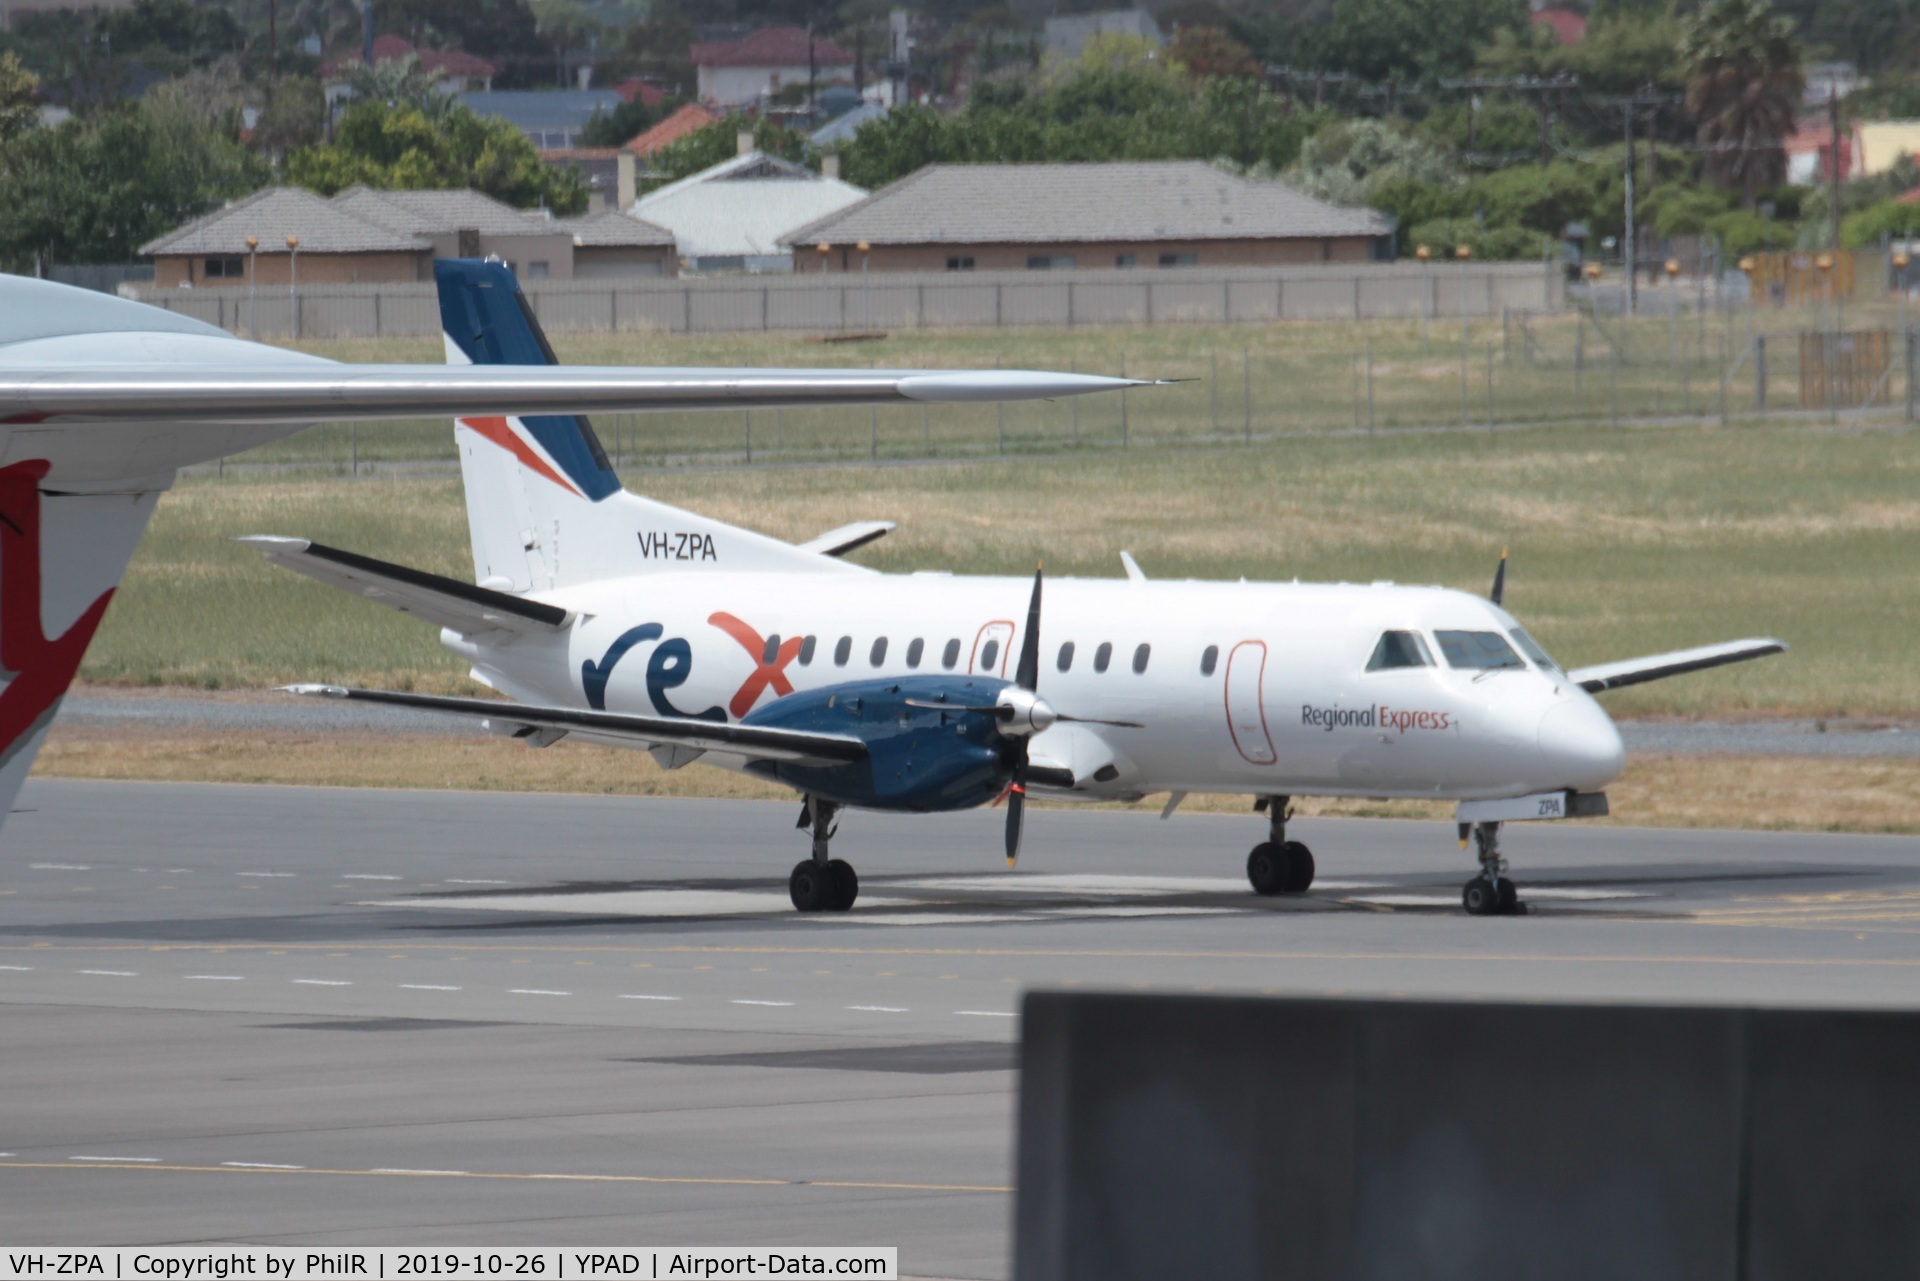 VH-ZPA, 1997 Saab 340B C/N 340B-410, Taxying out at Adelaide